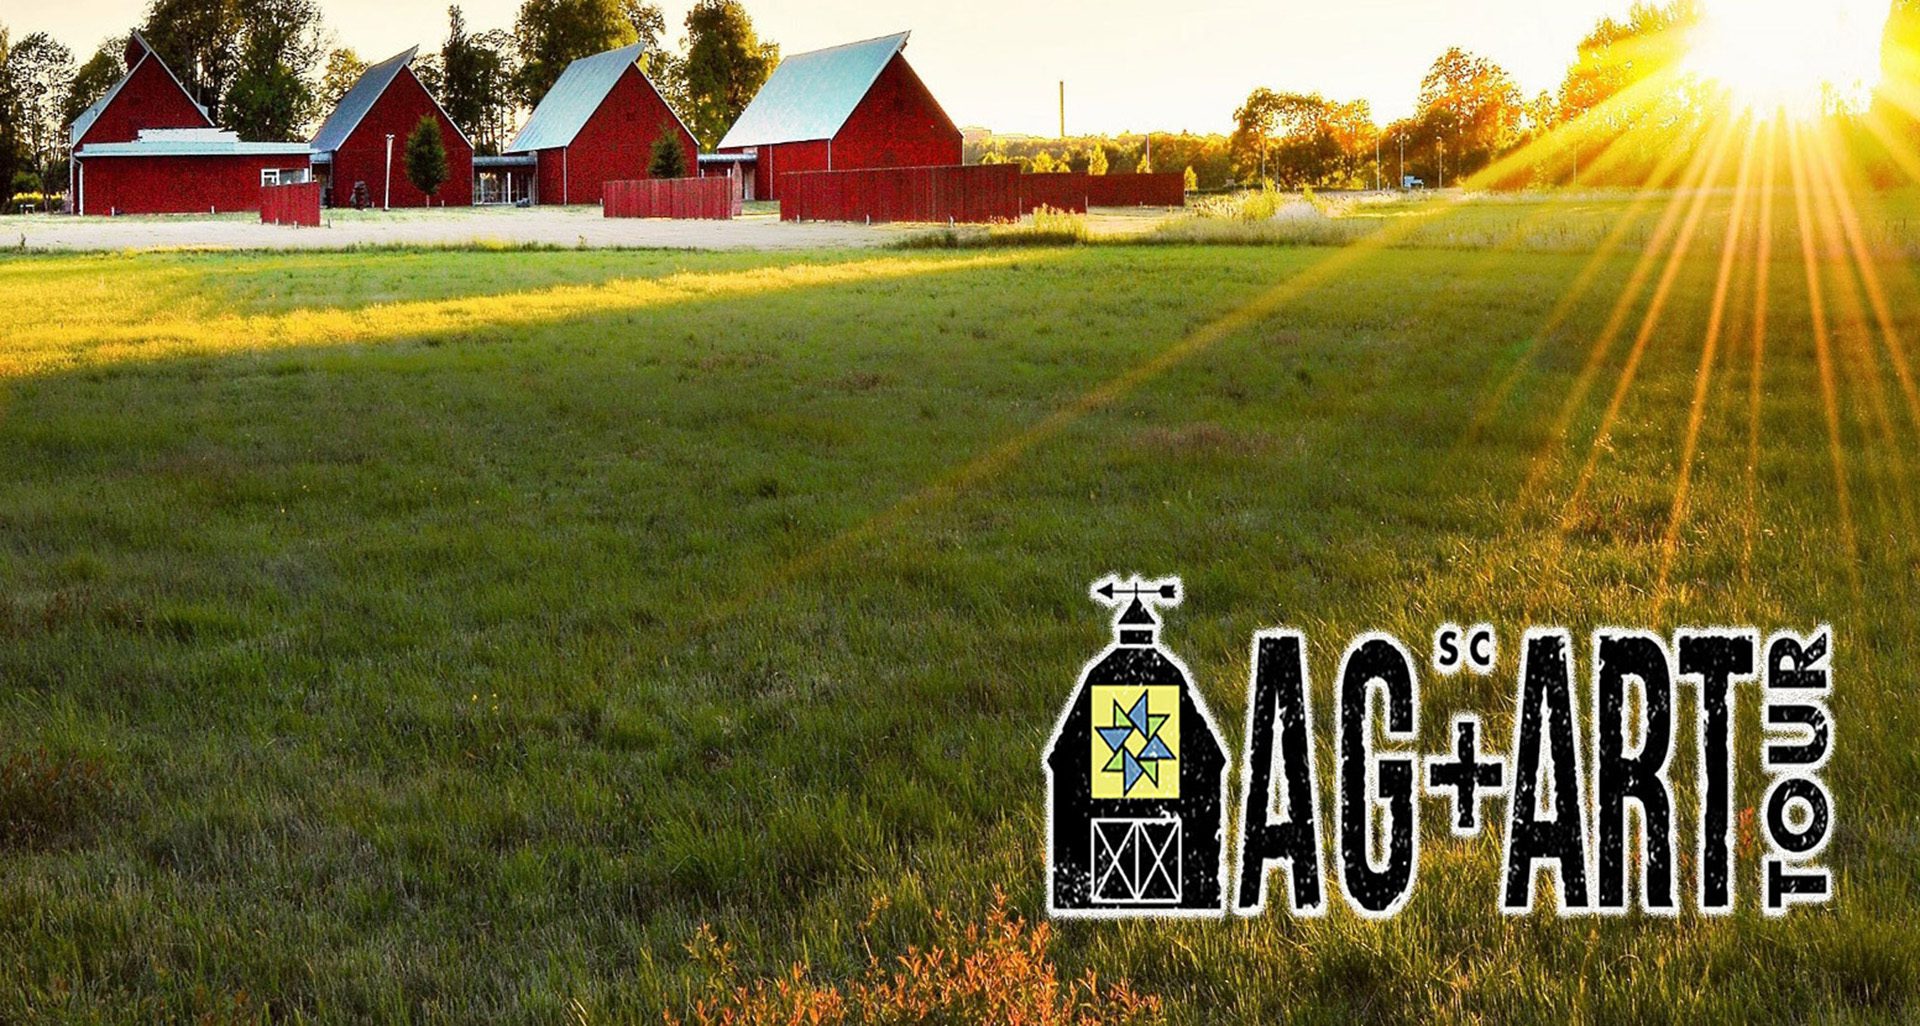 The 2022 South Carolina Ag and Art Tour is May 14 through June 26.